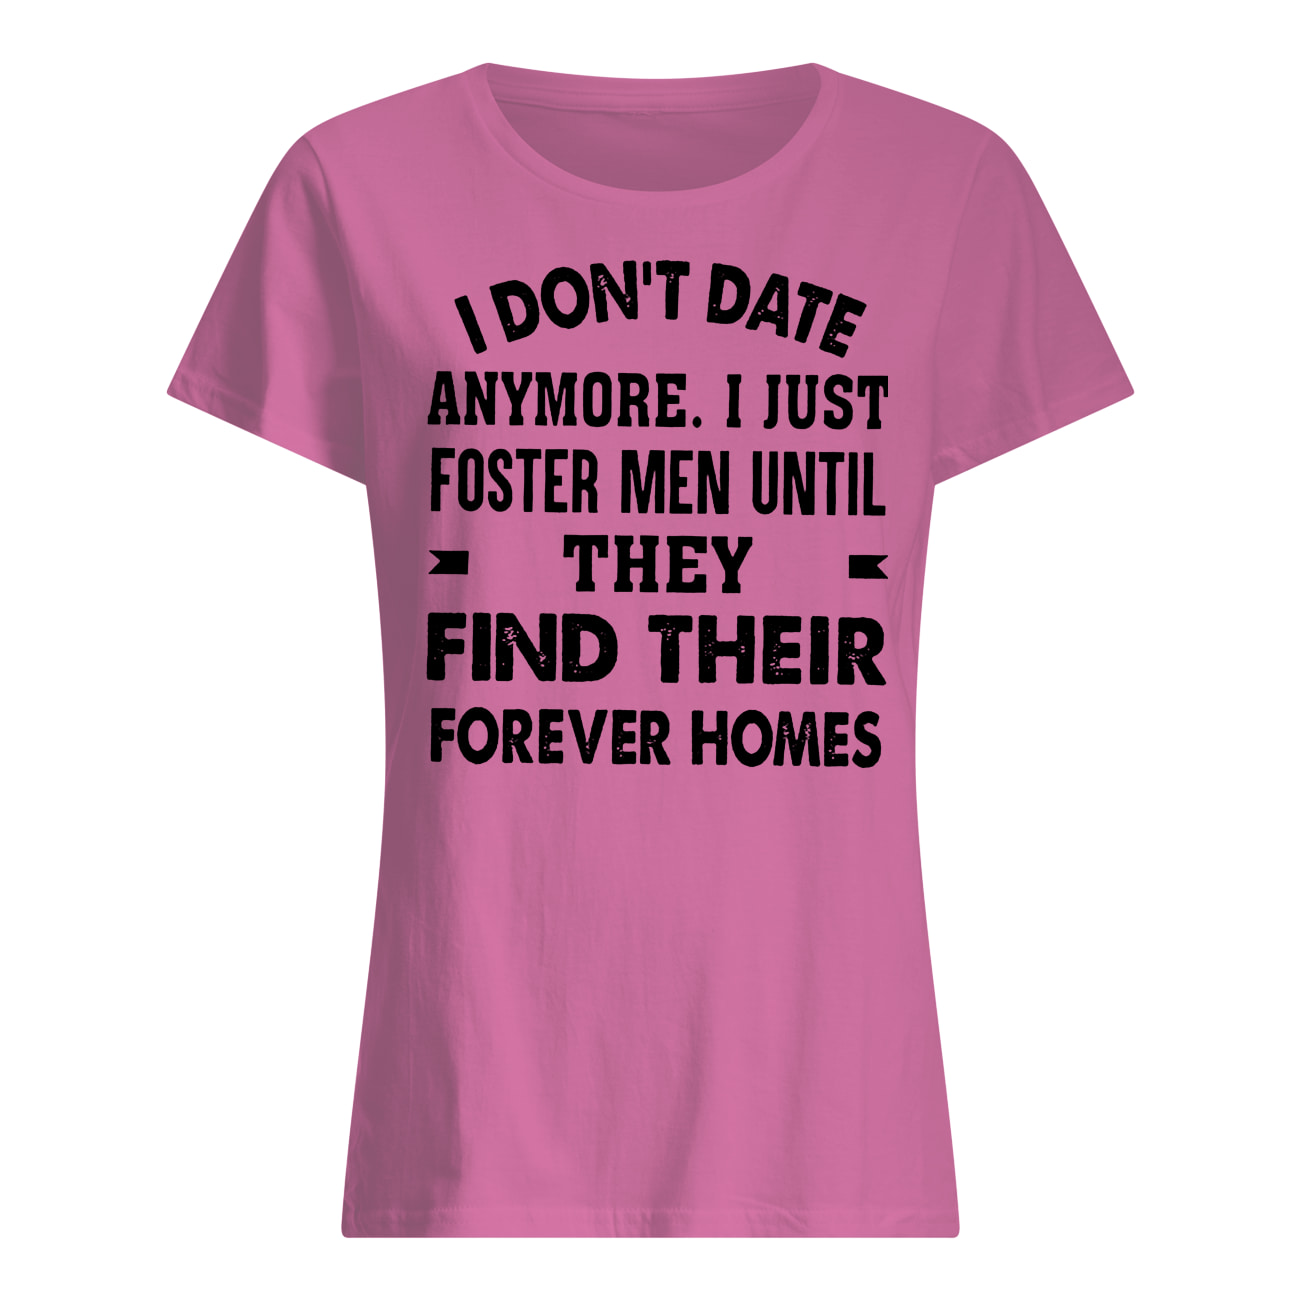 I don't date anymore I just foster men until they find their forever homes womens shirt